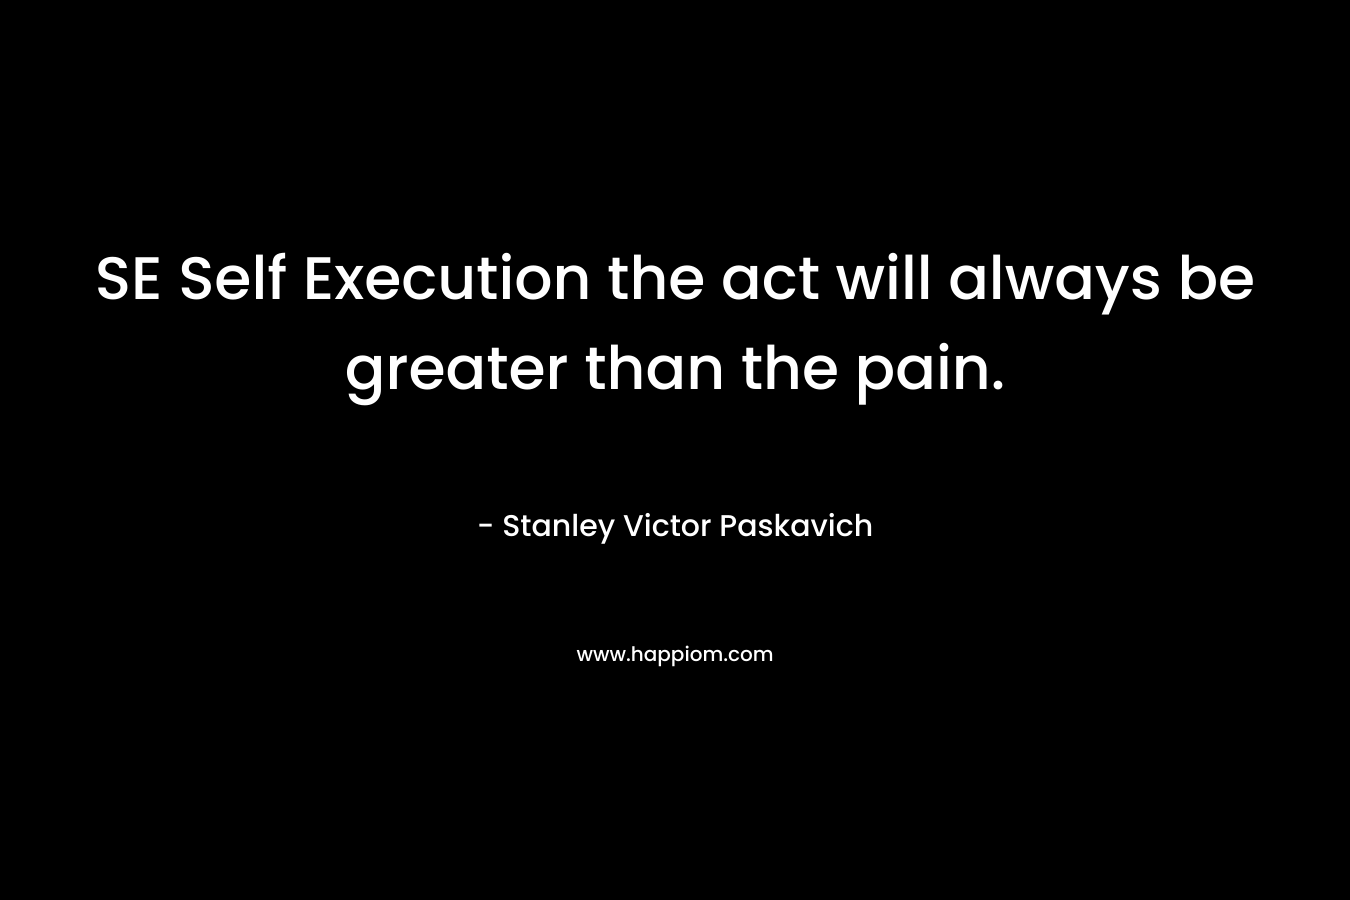 SE Self Execution the act will always be greater than the pain.